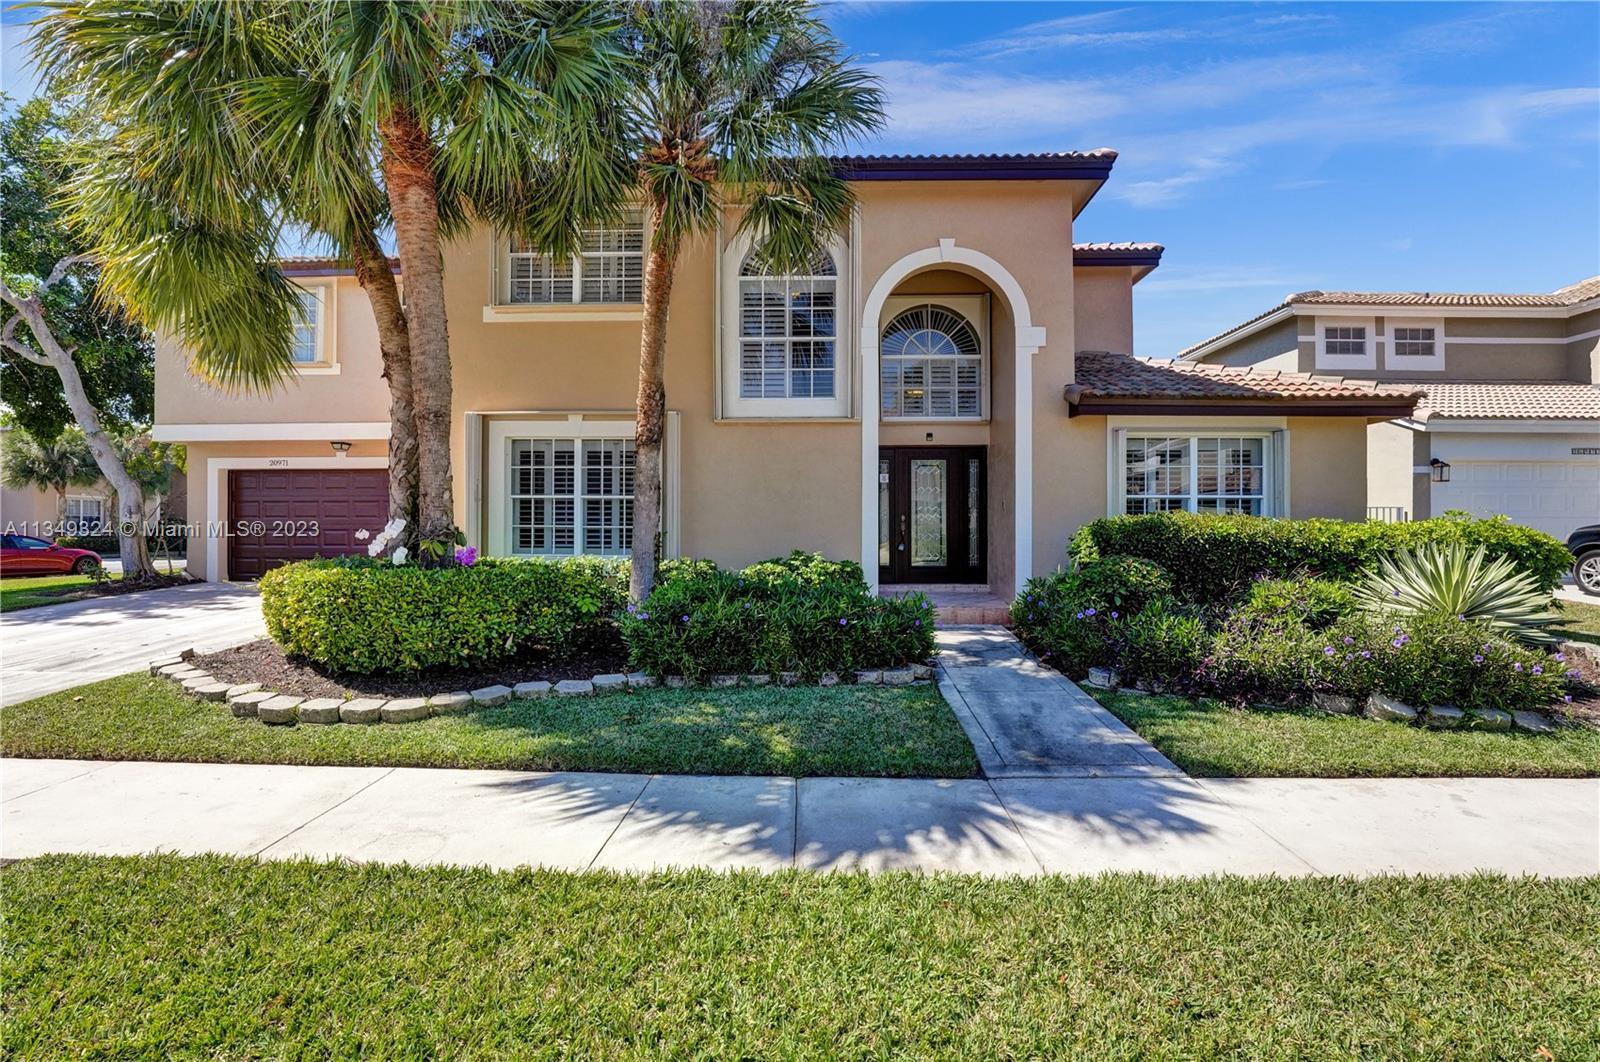 This gorgeous two-story contemporary home situated in the prestigious gated community of Regatta in 